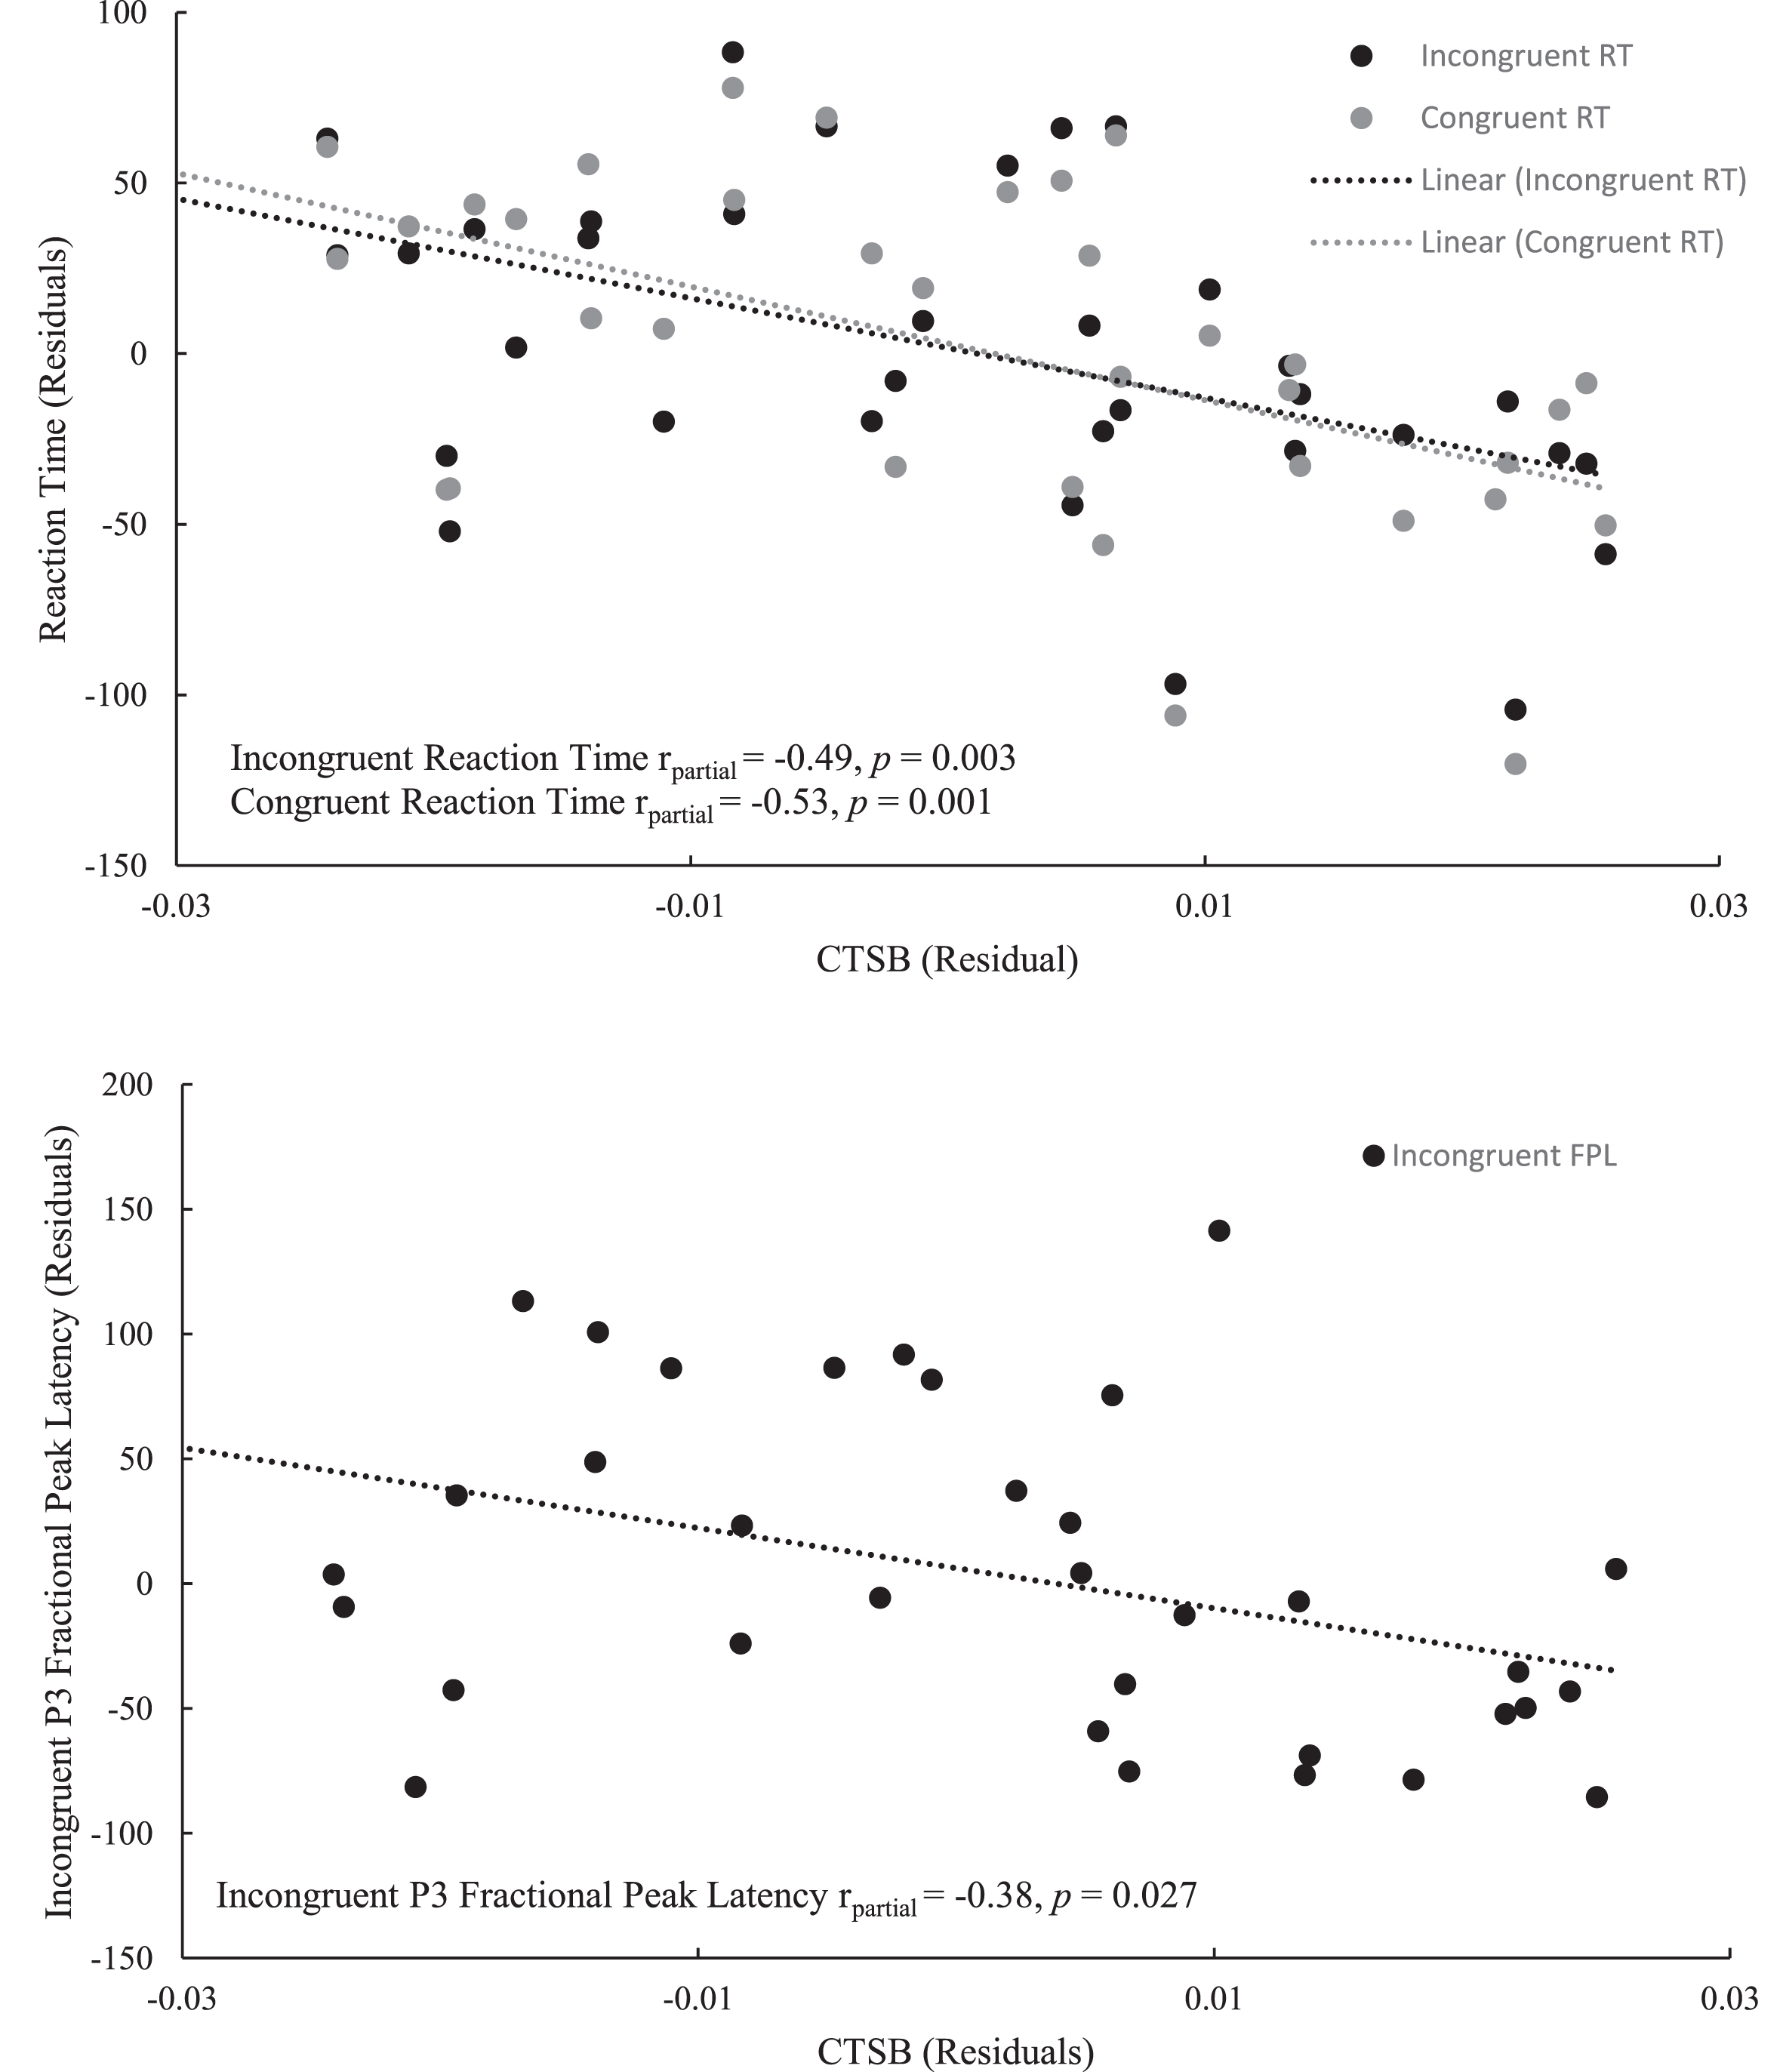 Partial correlation between CTSB and the Flanker outcomes: reaction time for both congruent and incongruent trials (above), P3 fractional peak latency for the incongruent trials (below).